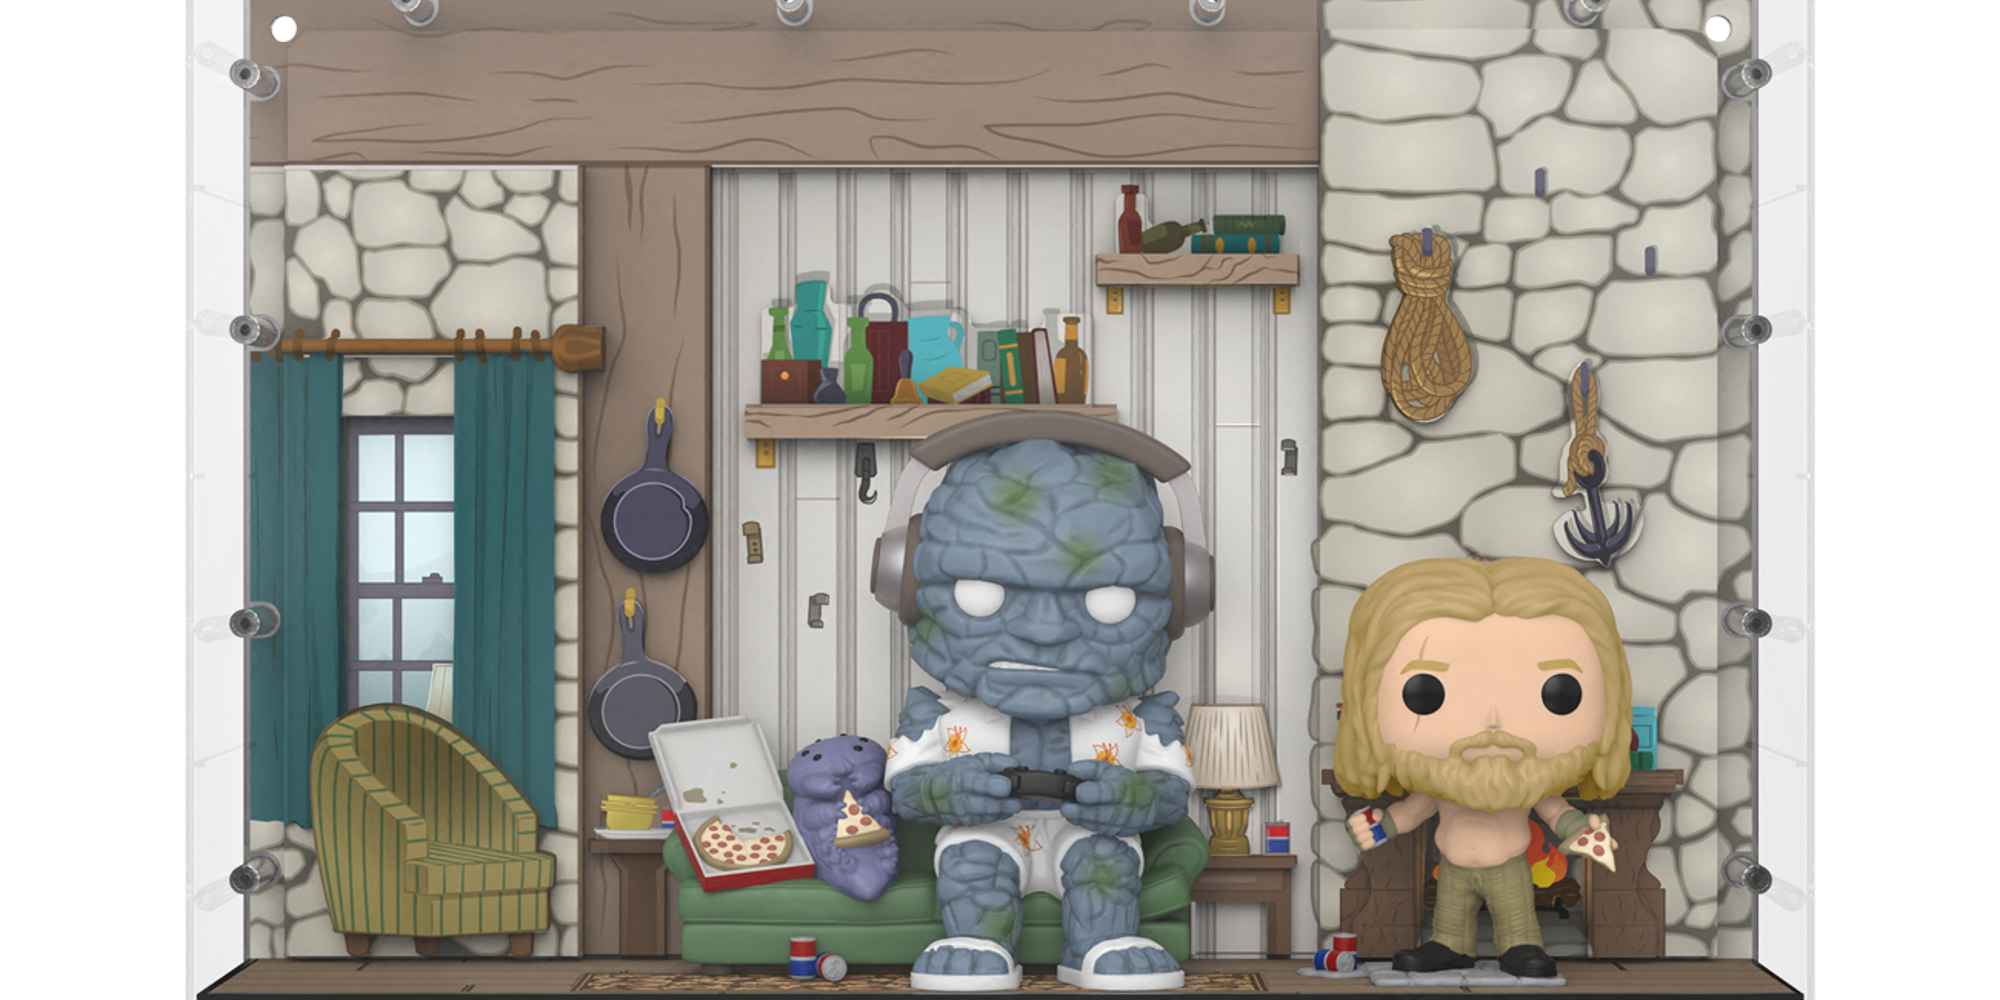 korg and thor pops in thor's funko house